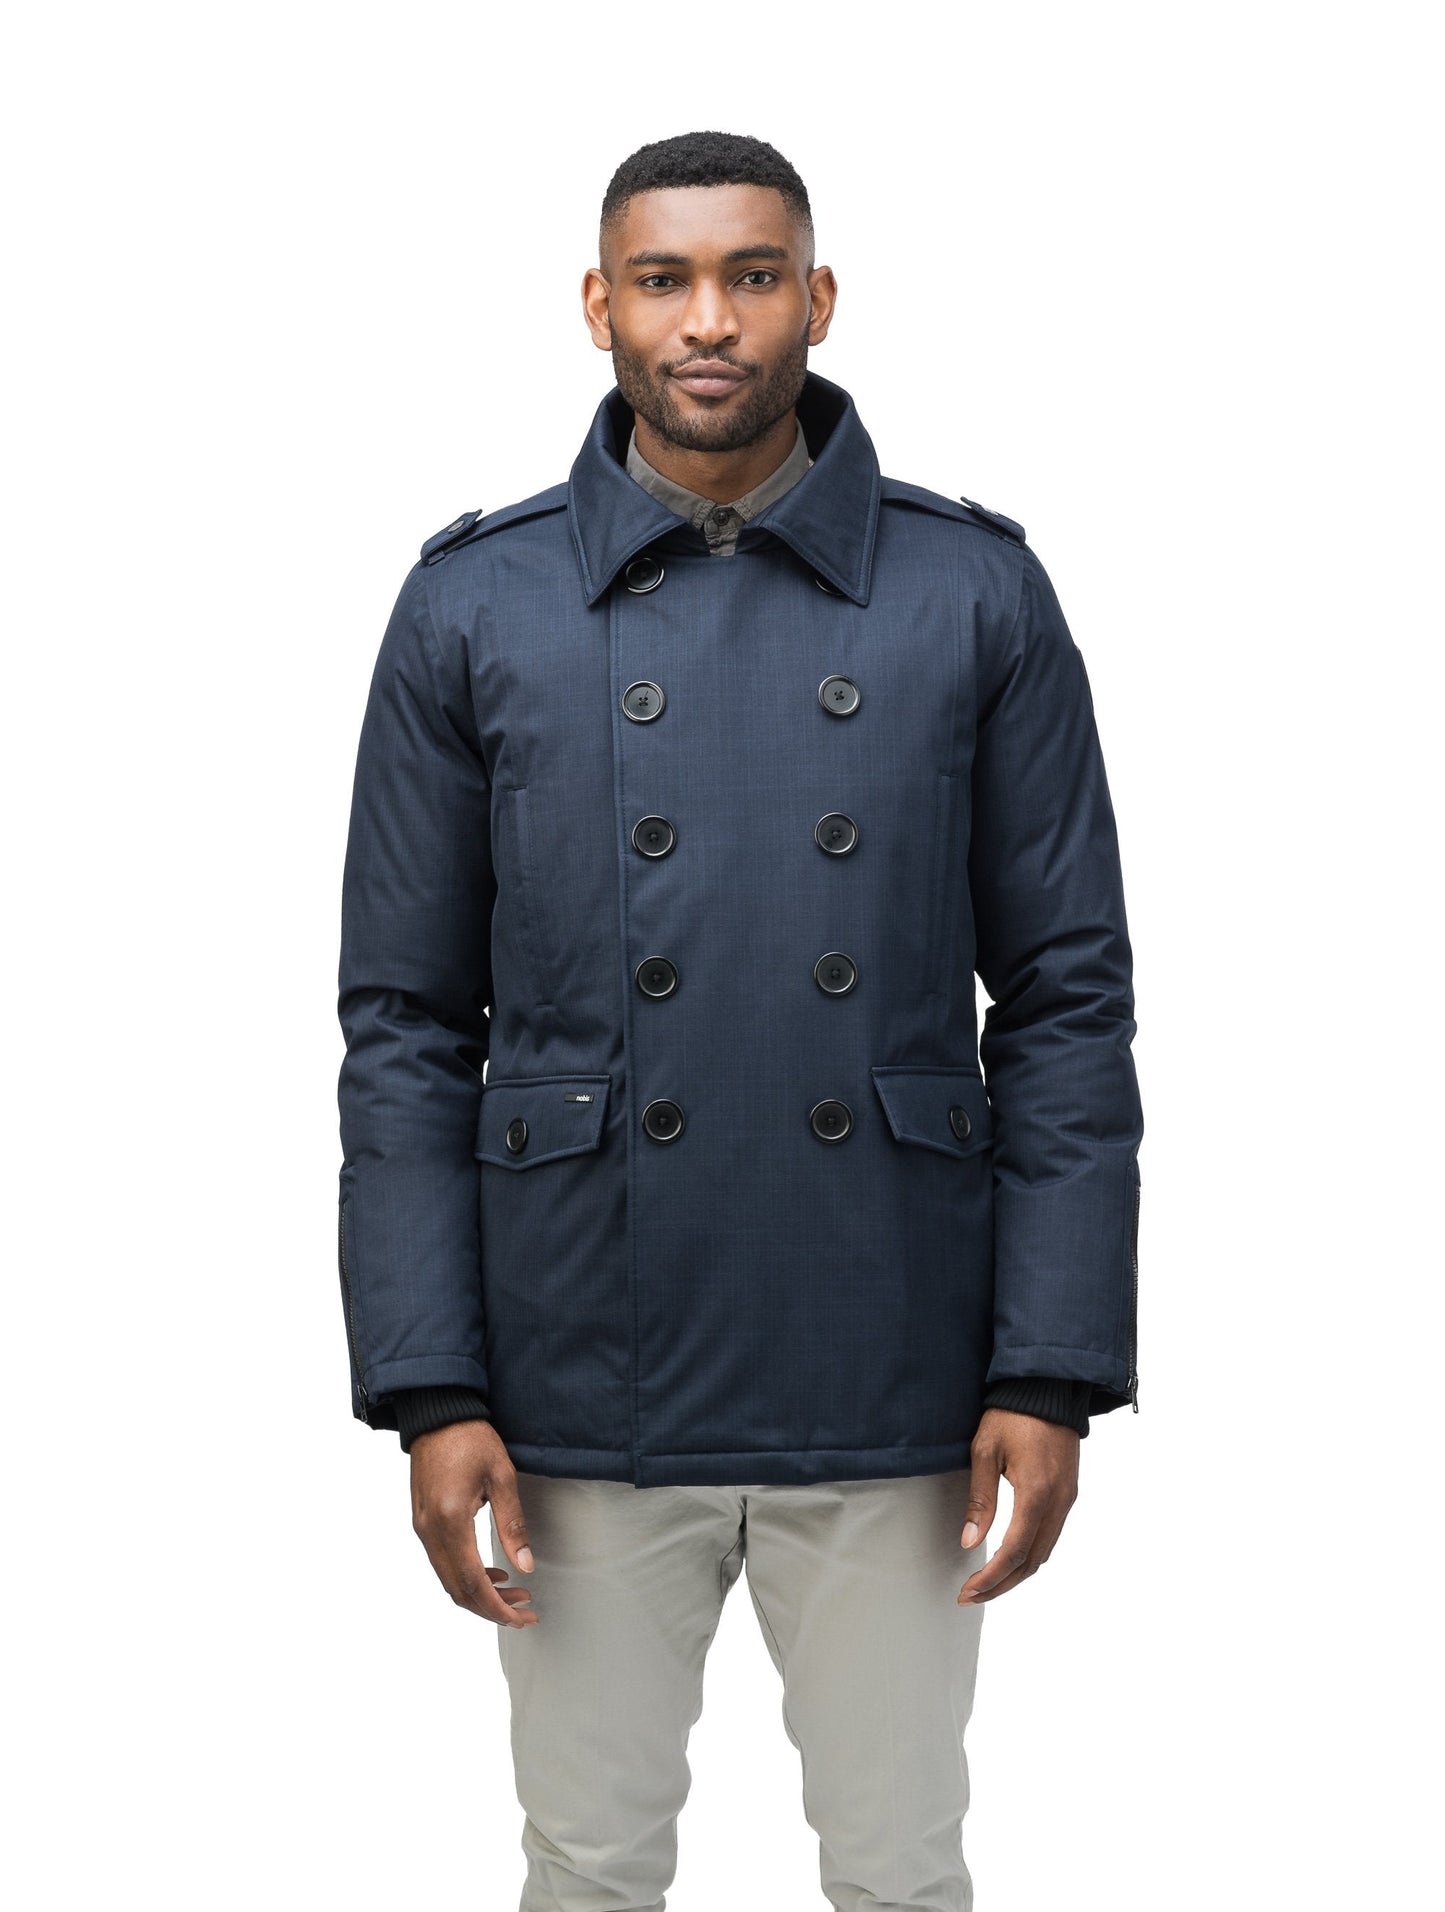 Men's double breasted down filled parka in CH Navy